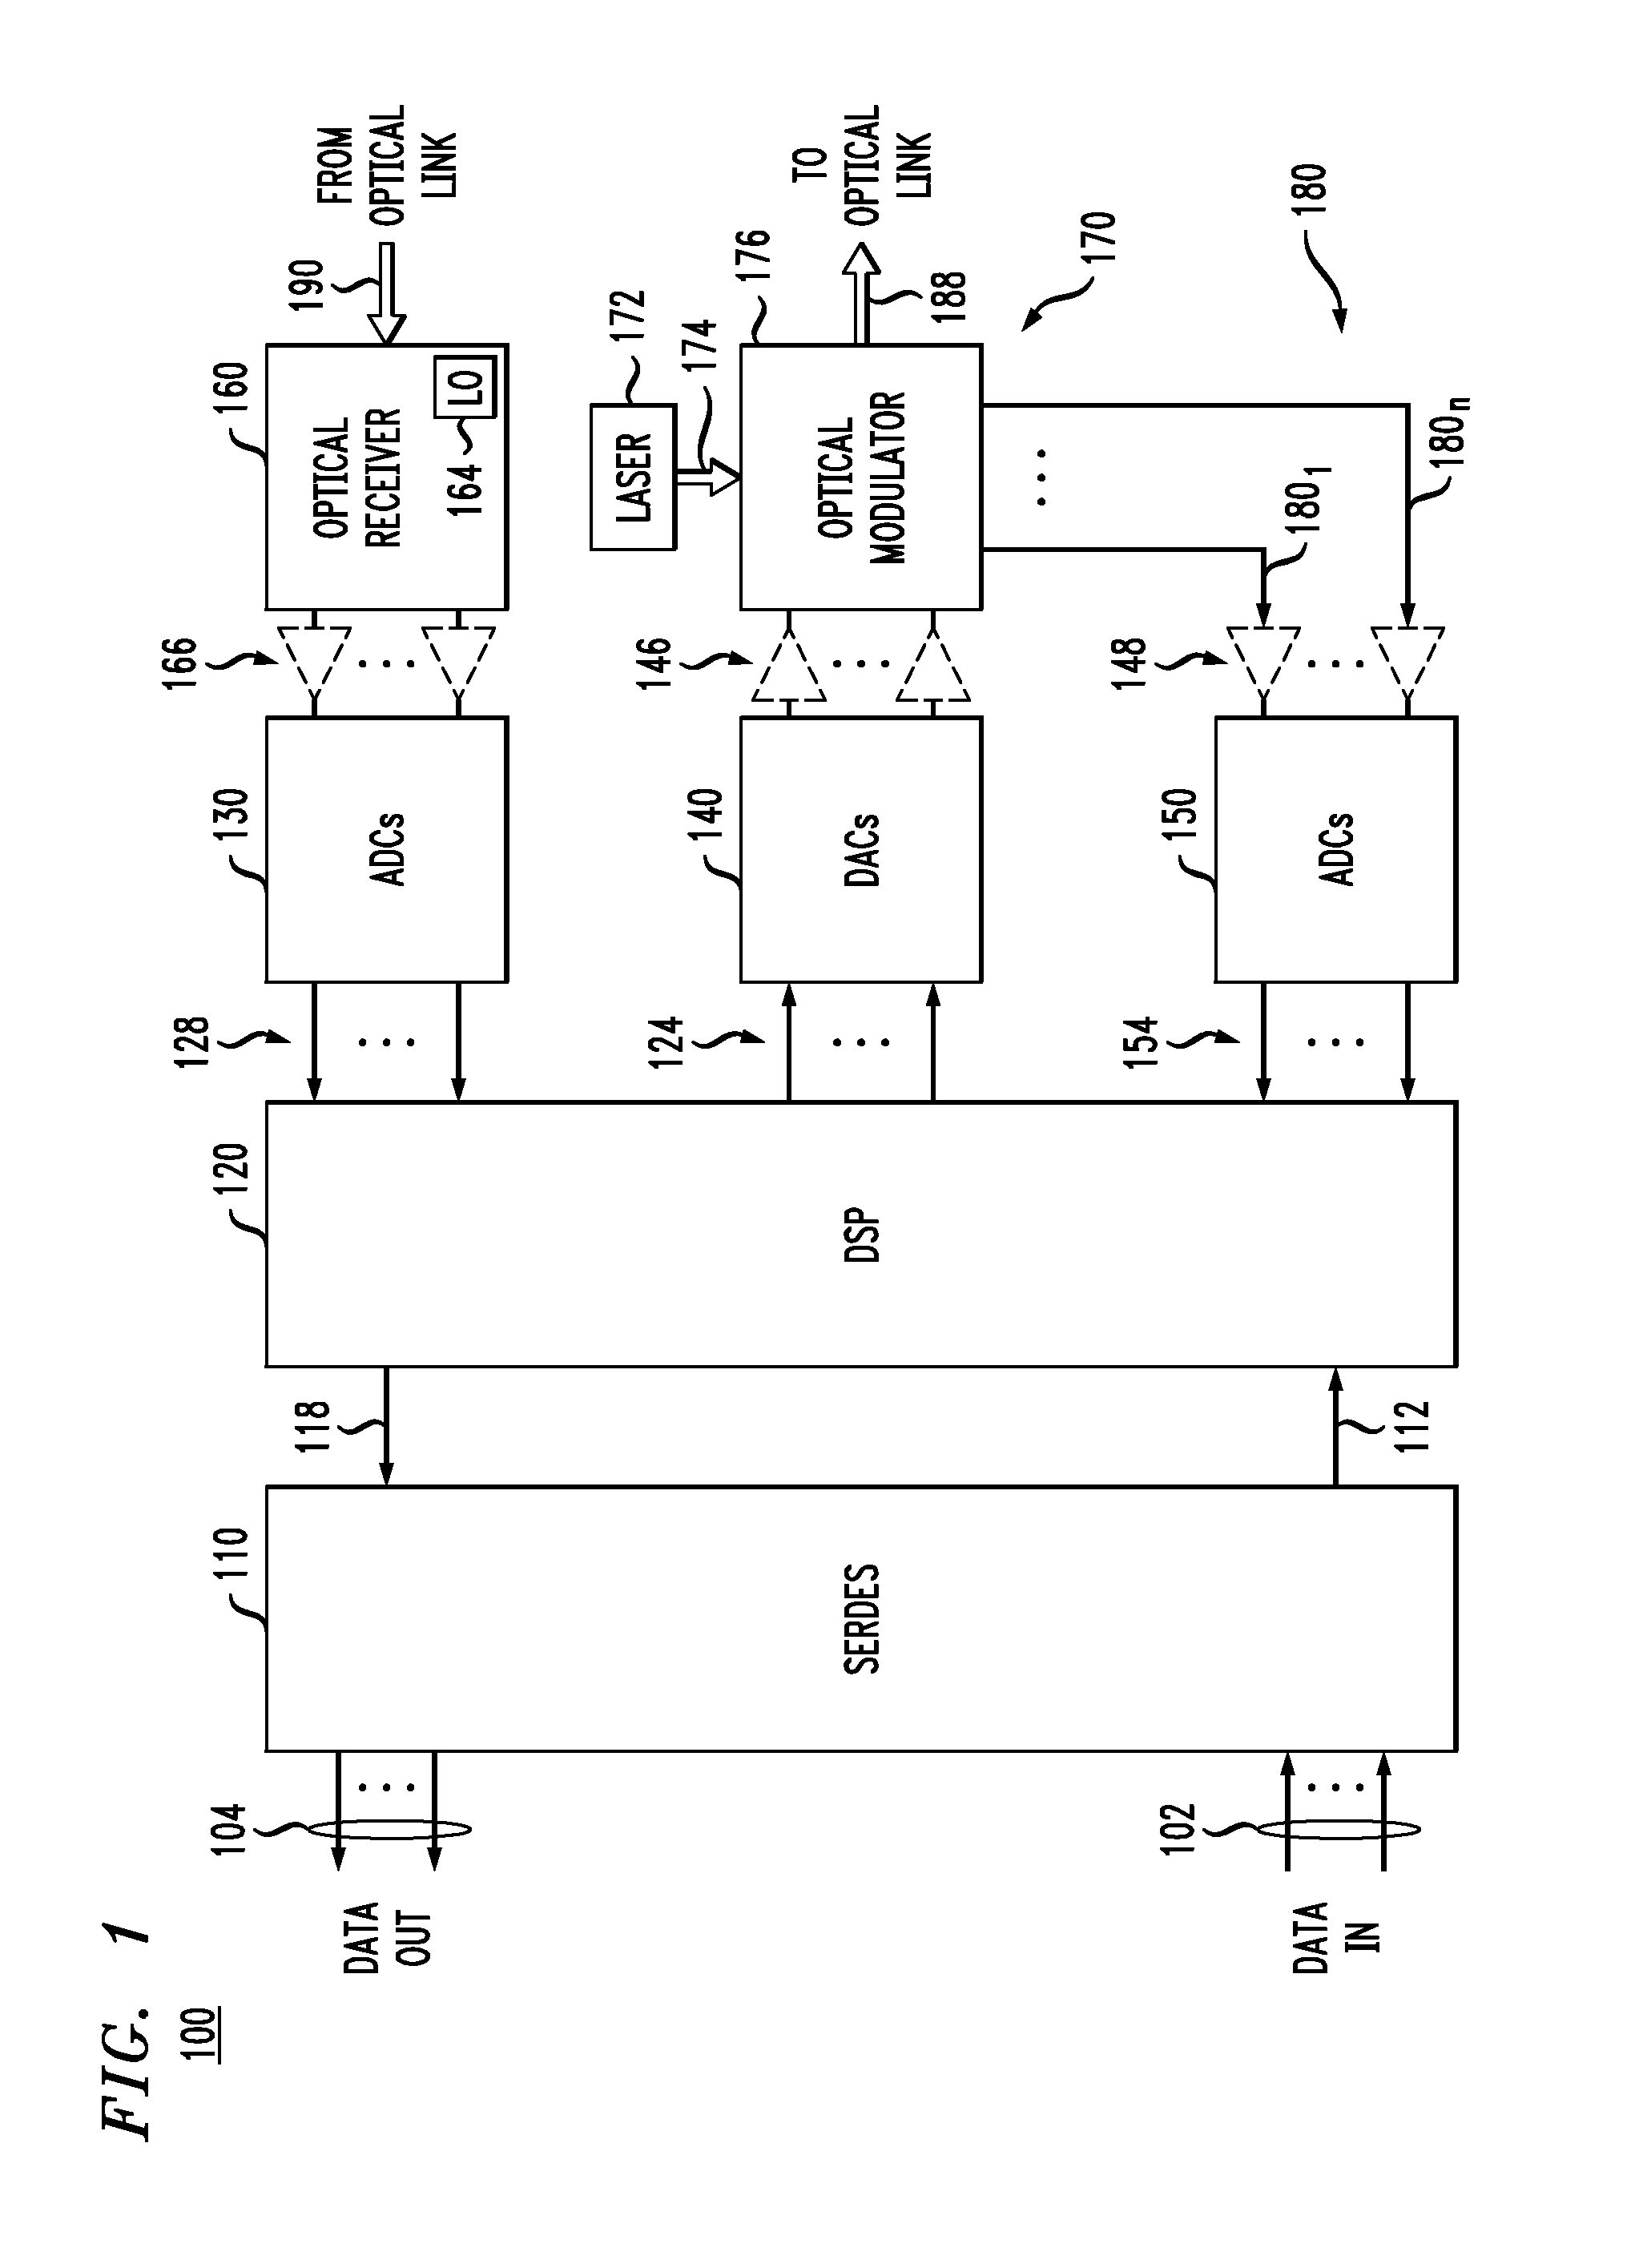 Feedback for electronic pre-distortion in an optical transmitter